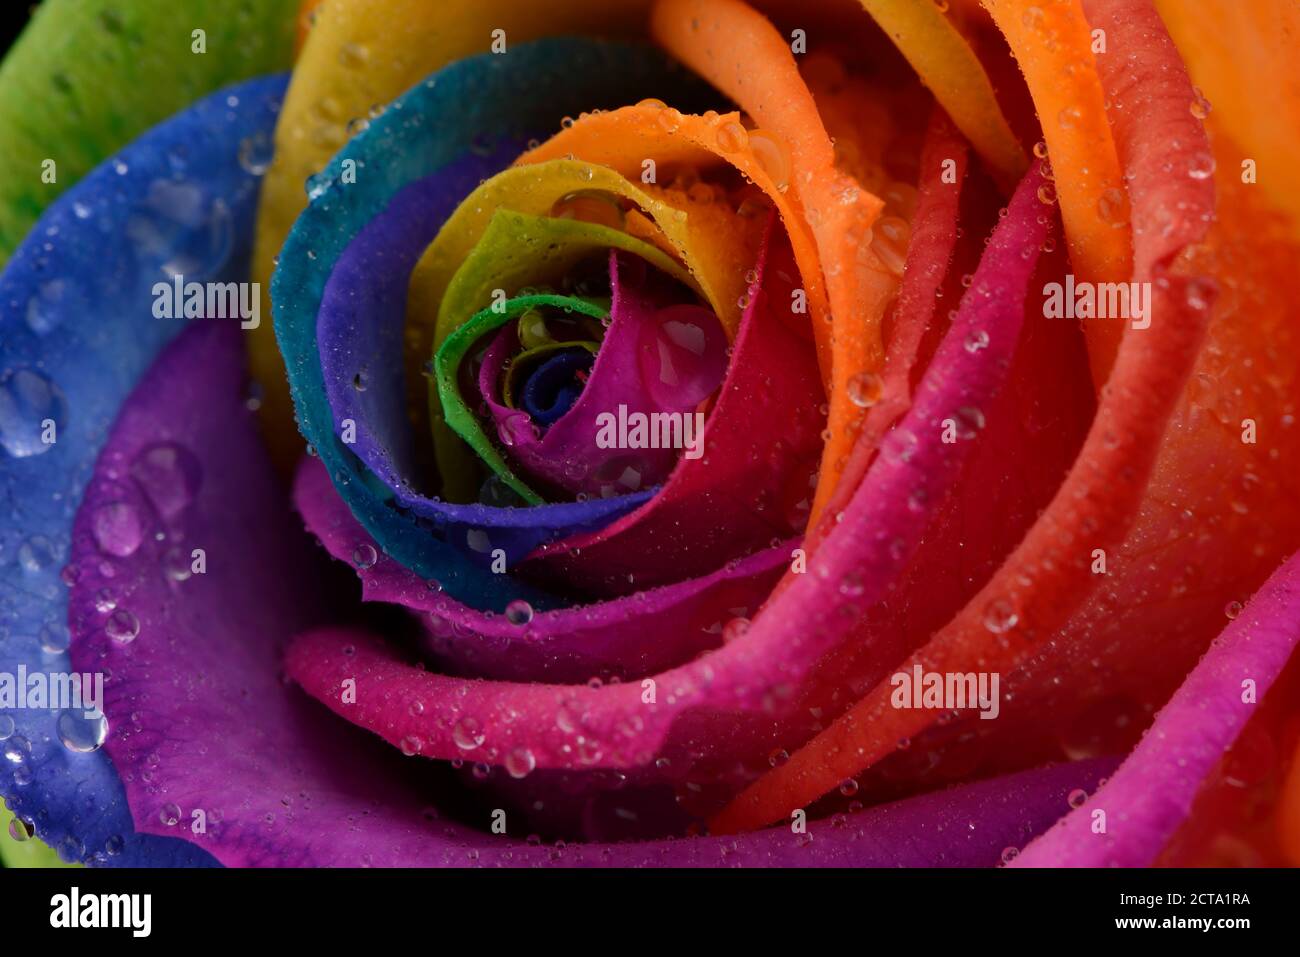 Blossom of prismatic coloured rose, Rosa, partial view Stock Photo